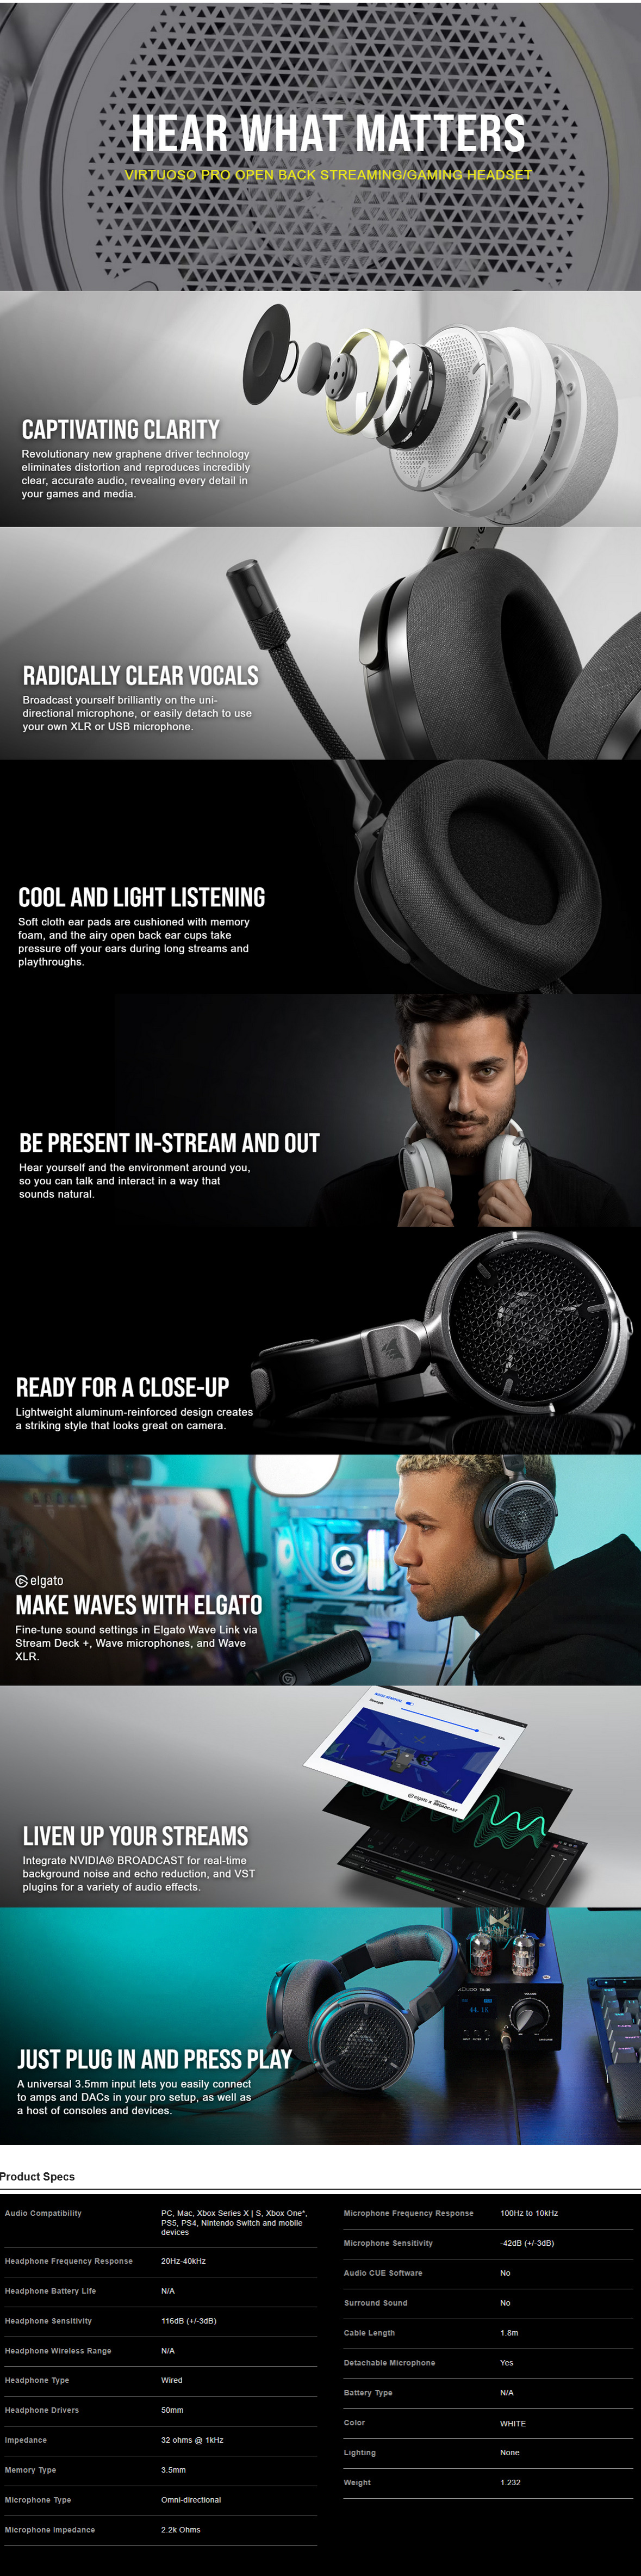 A large marketing image providing additional information about the product Corsair VIRTUOSO PRO Open Back Gaming Headset - White - Additional alt info not provided